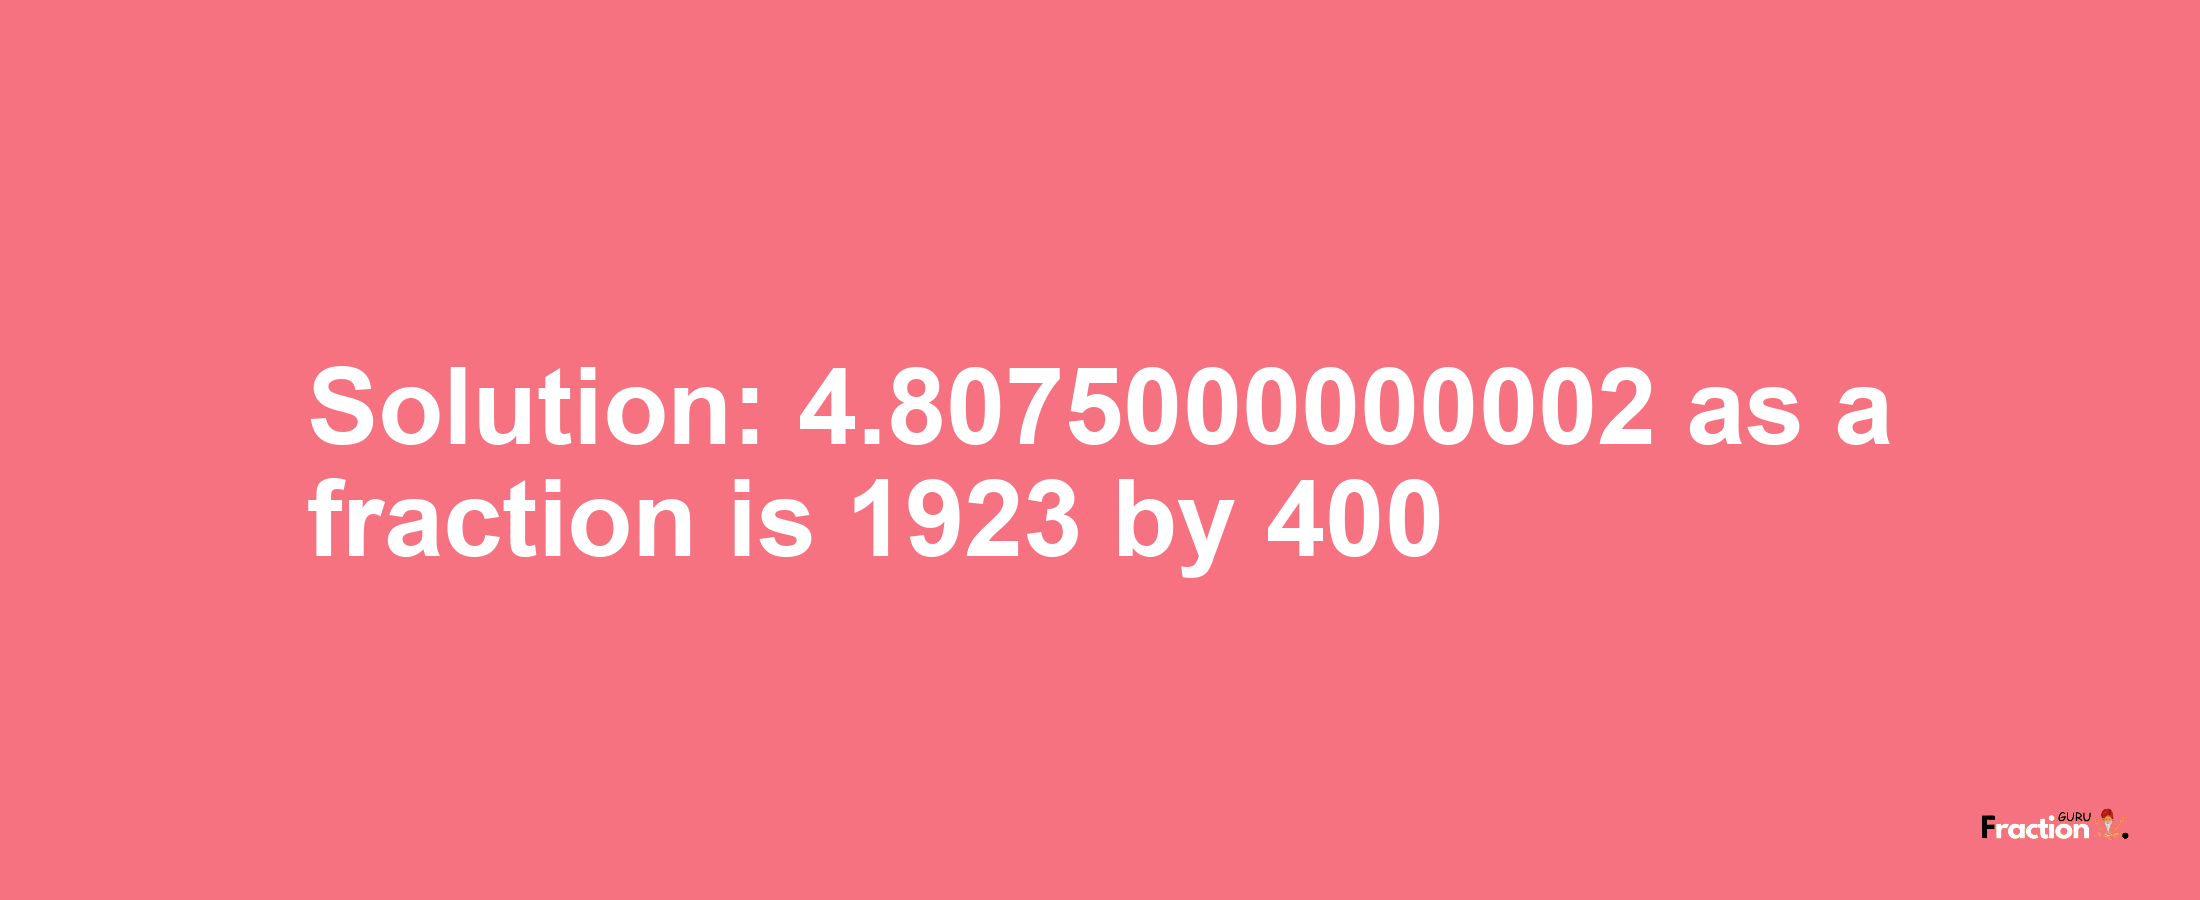 Solution:4.8075000000002 as a fraction is 1923/400